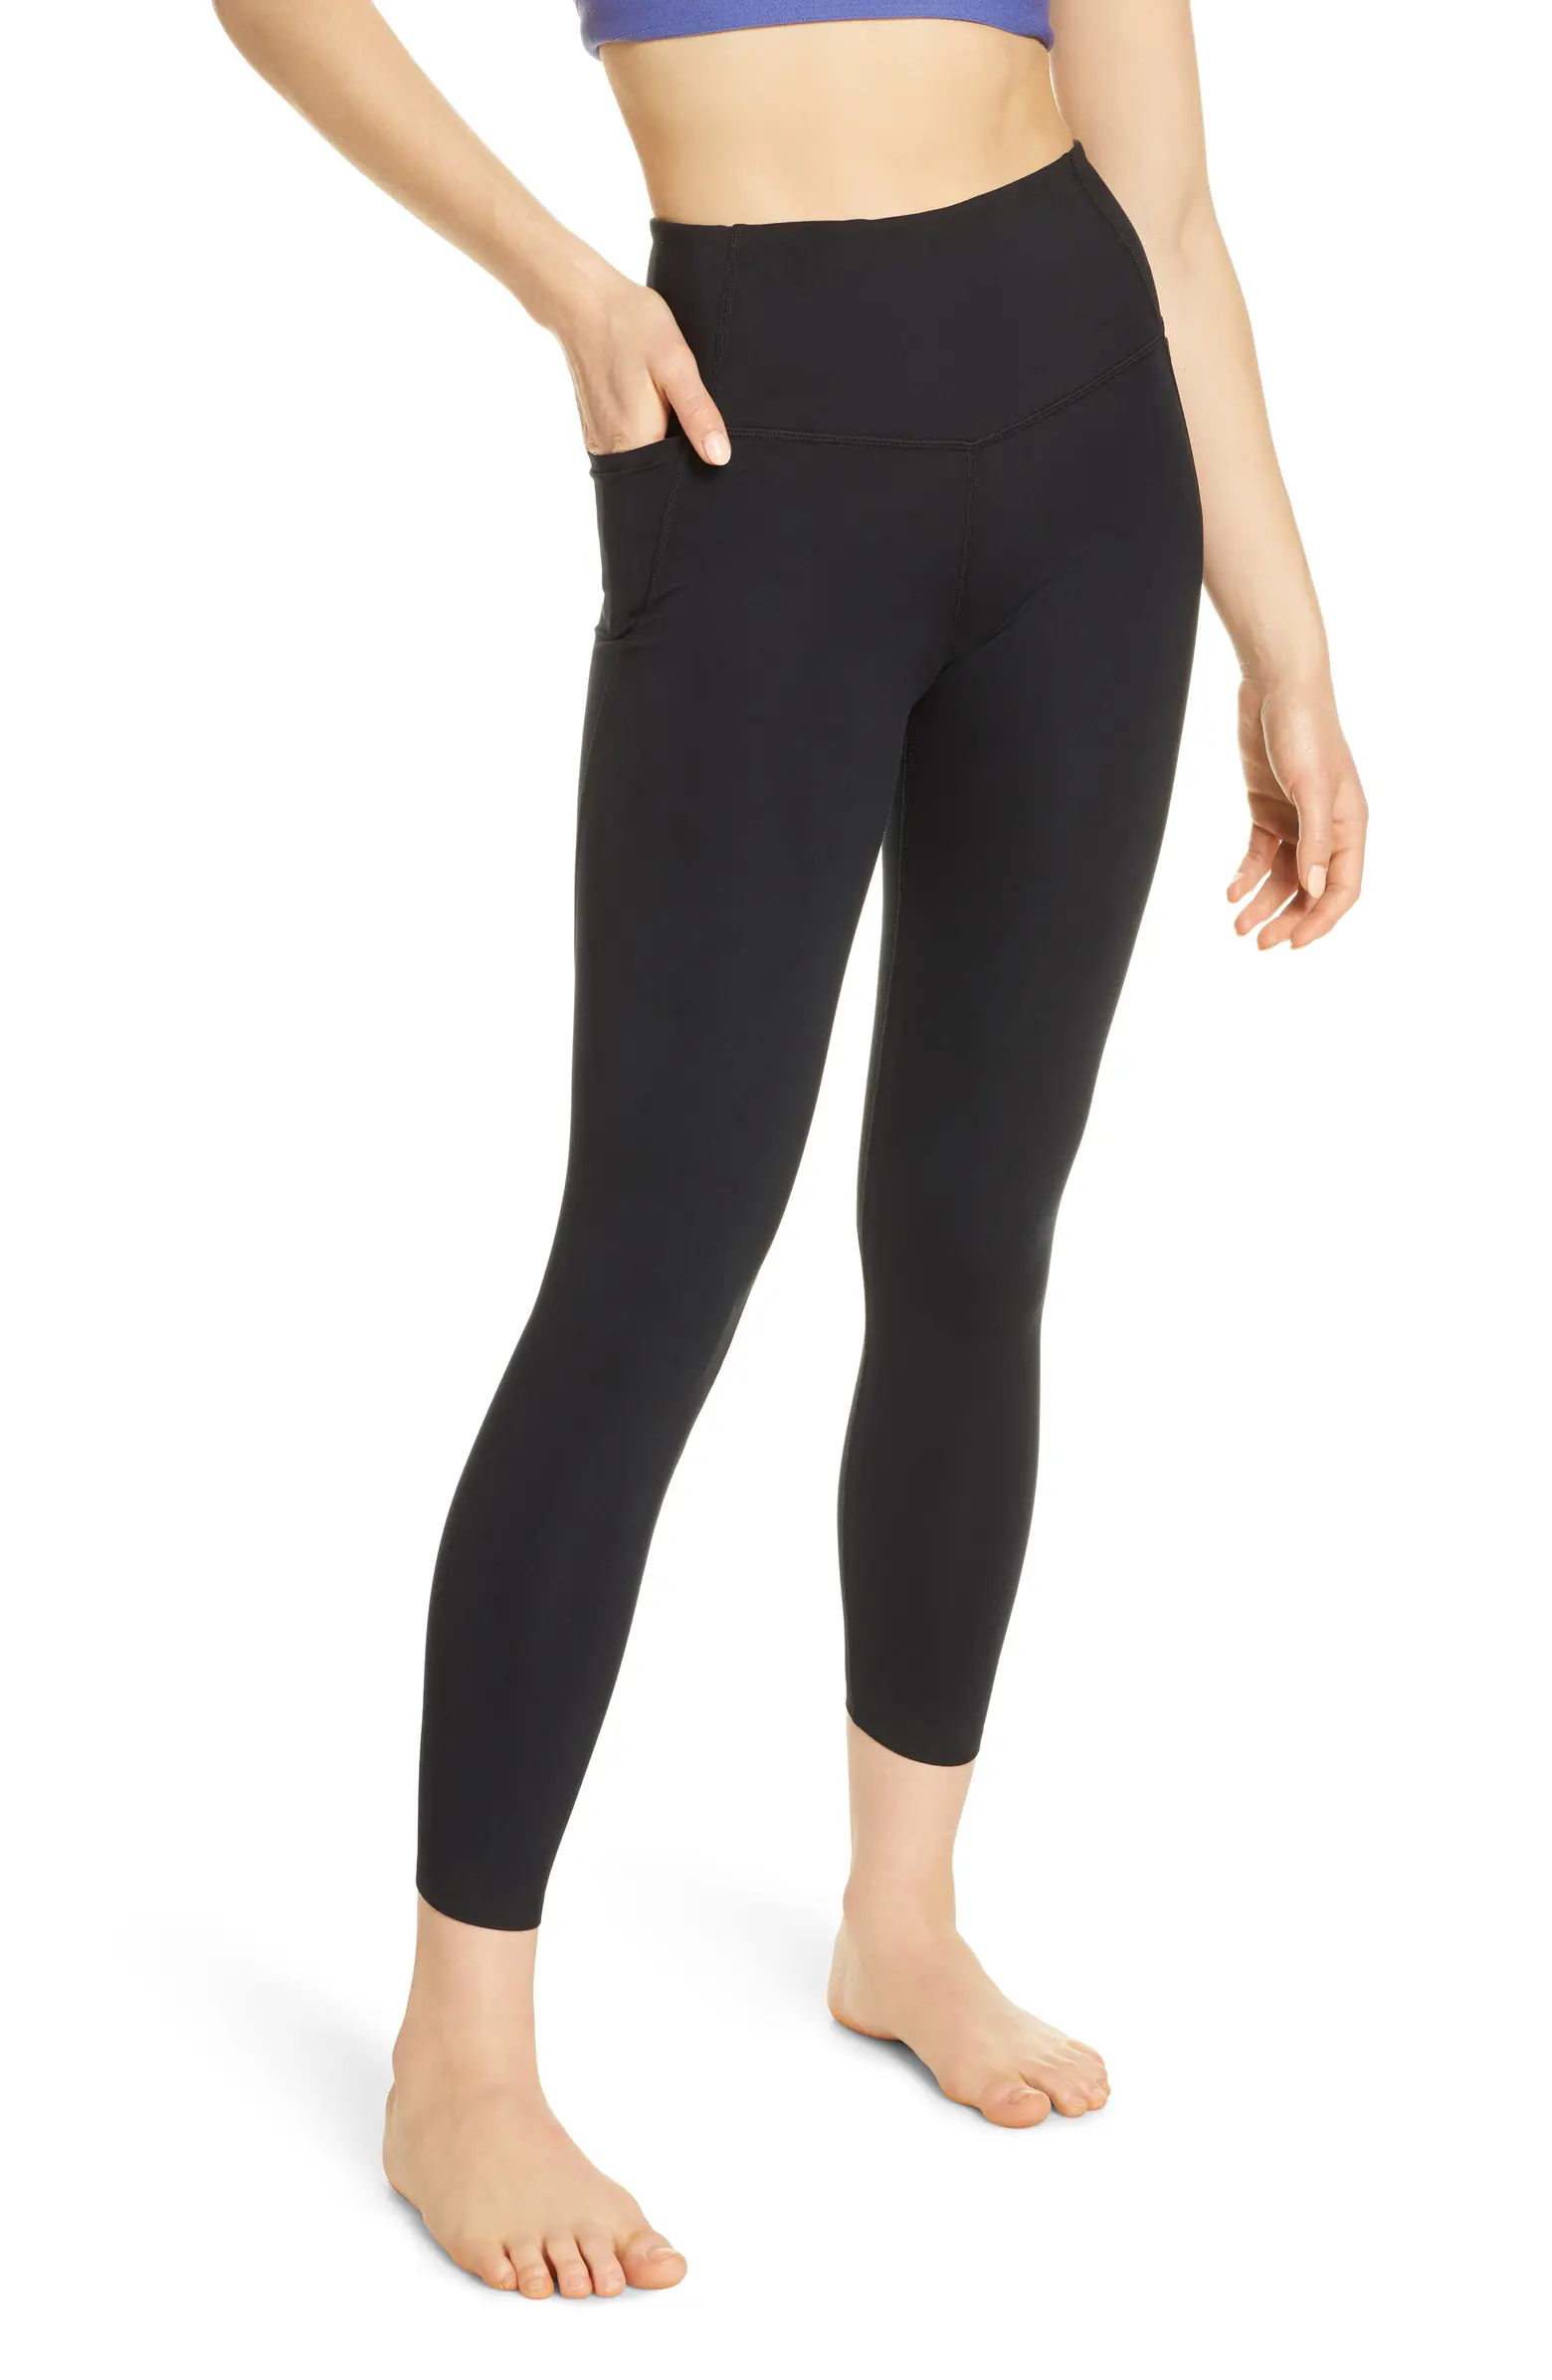 Yoga Pants with Pockets for Women High Waisted Workout Leggings 